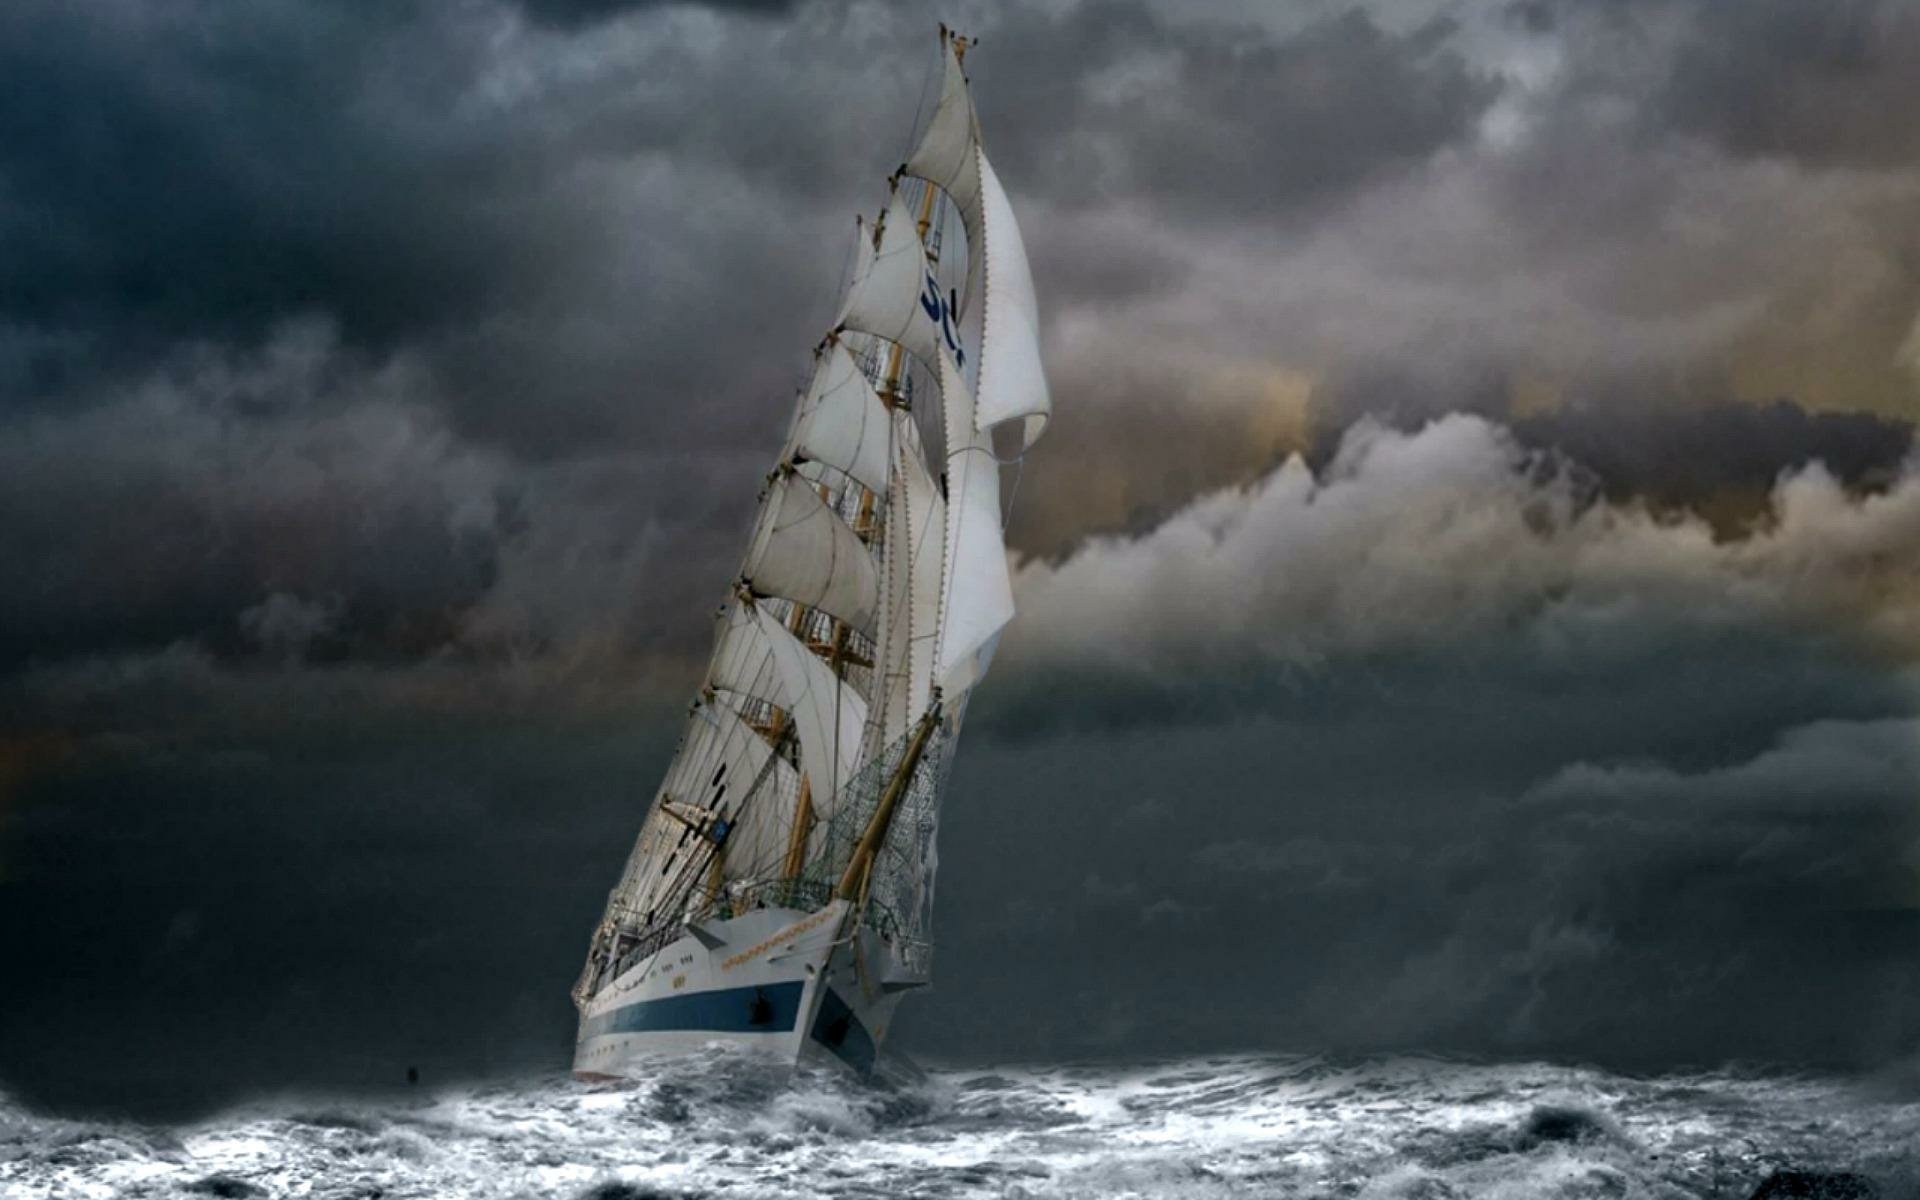 Download Sailing Ship on Stormy Sea HD Wallpaper | Background Image ...